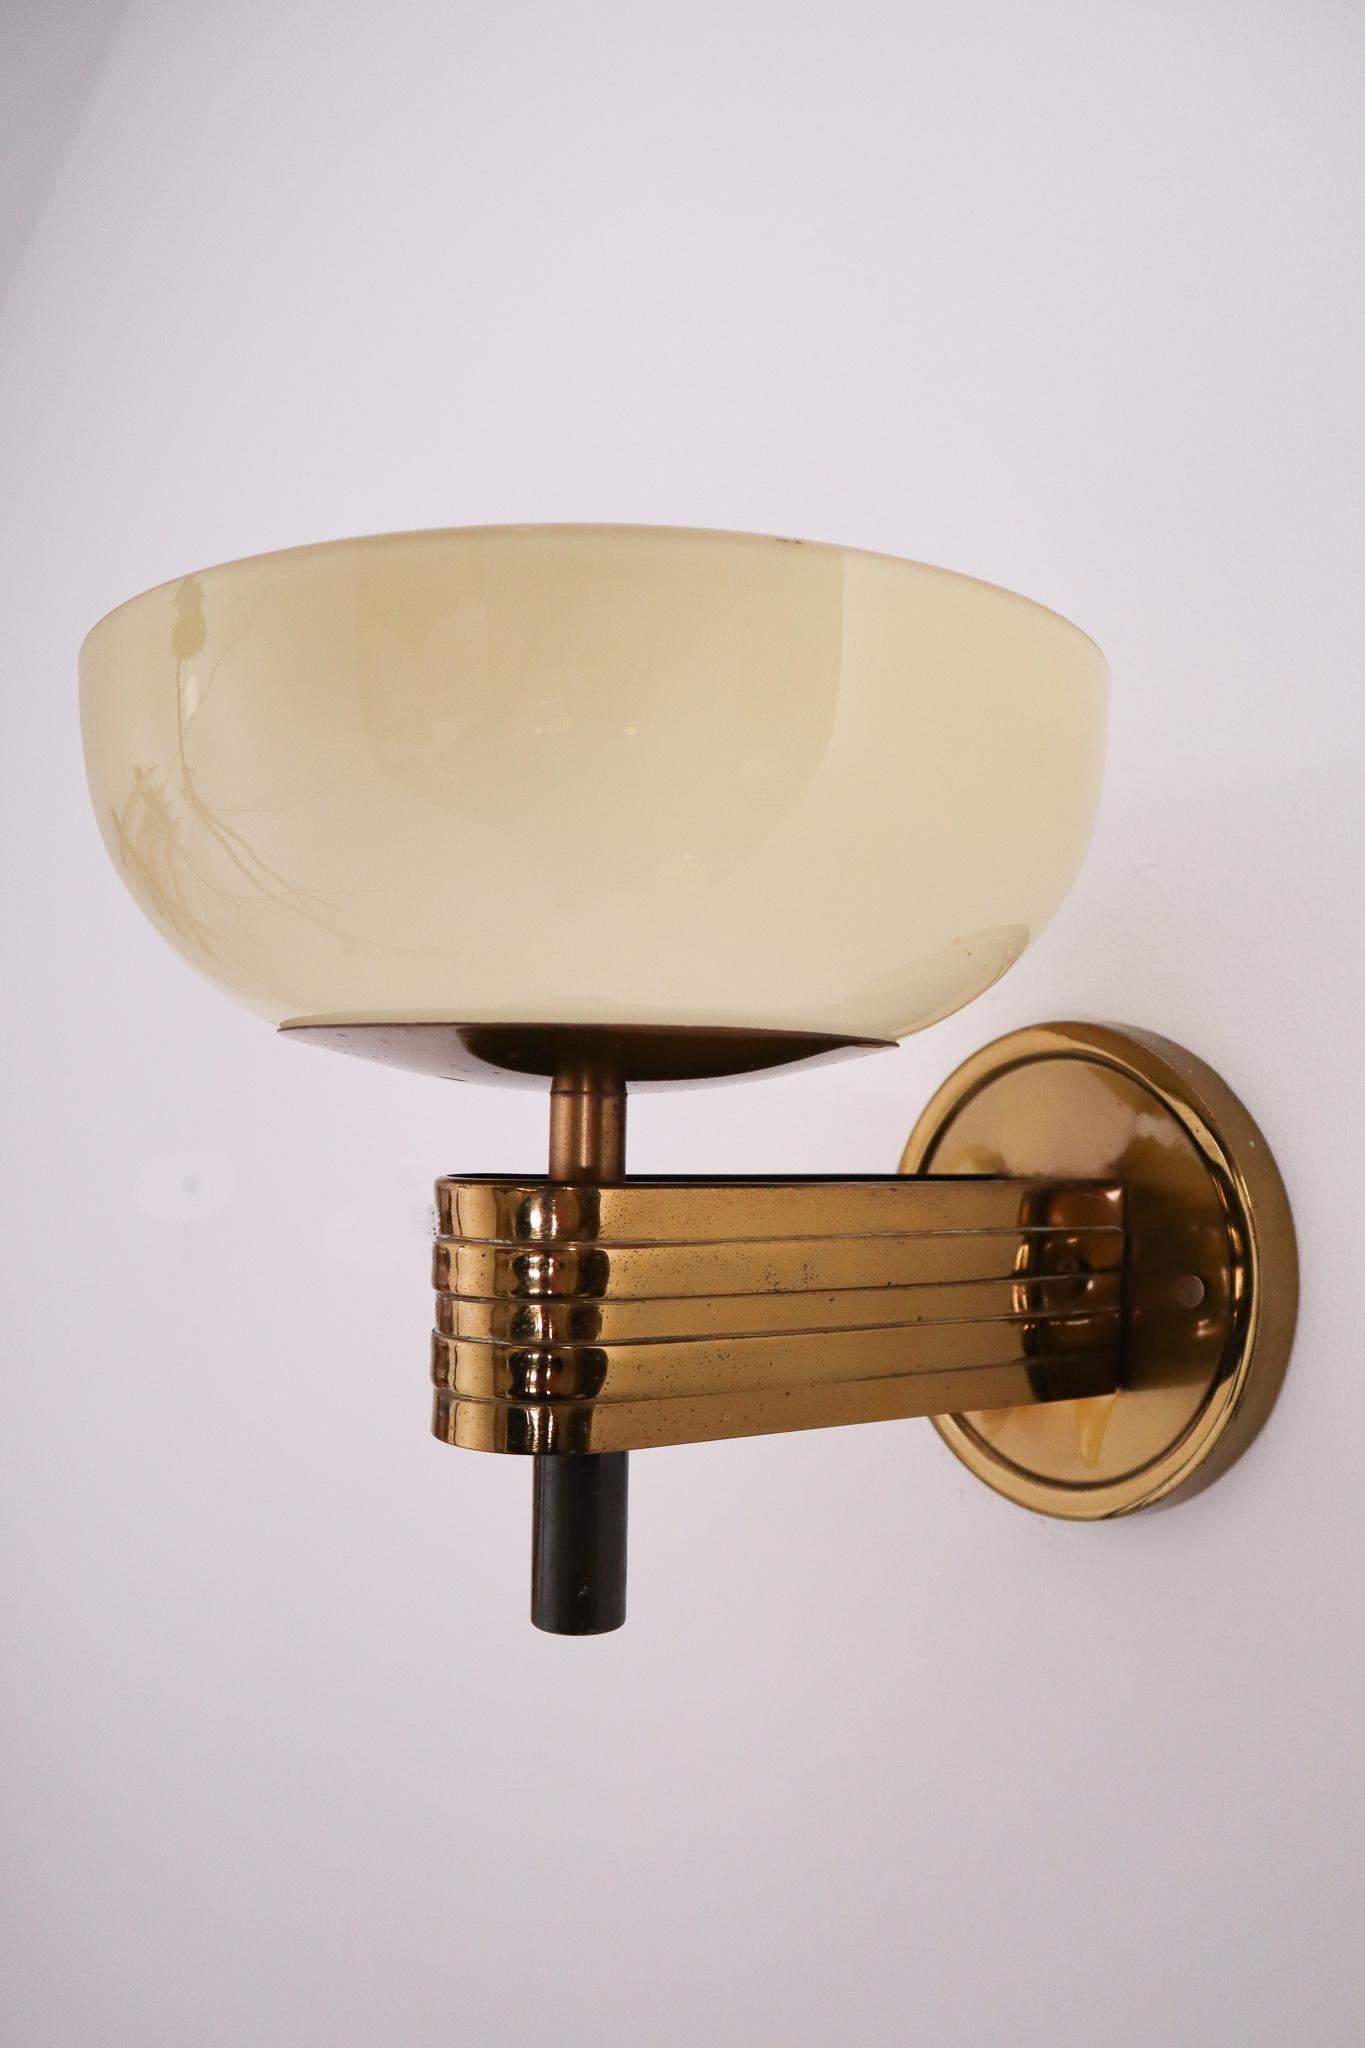 20th Century Large Art Deco Sconce with Opaline Glass and Brass Manufactured in Germany 1930